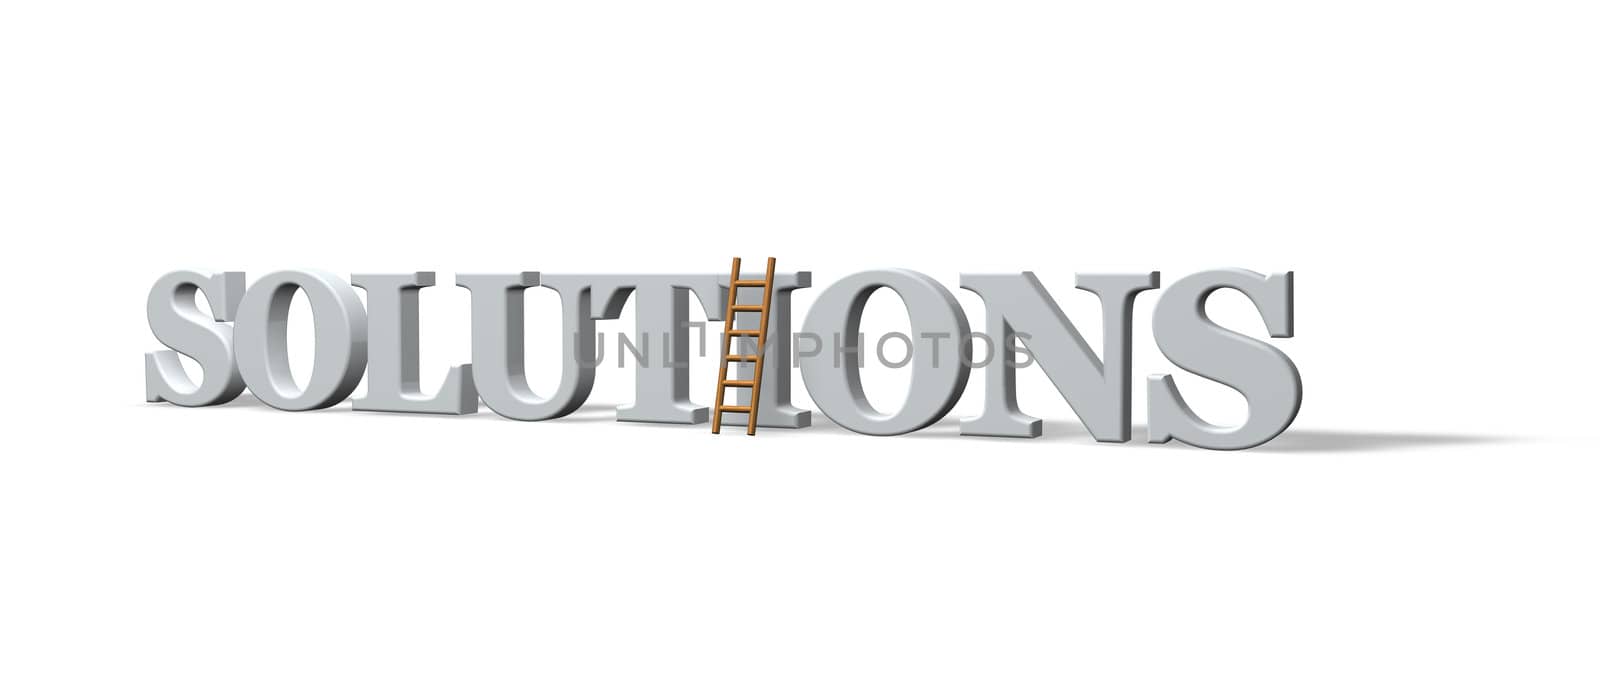 the word solutions and a ladder on white background - 3d illustration